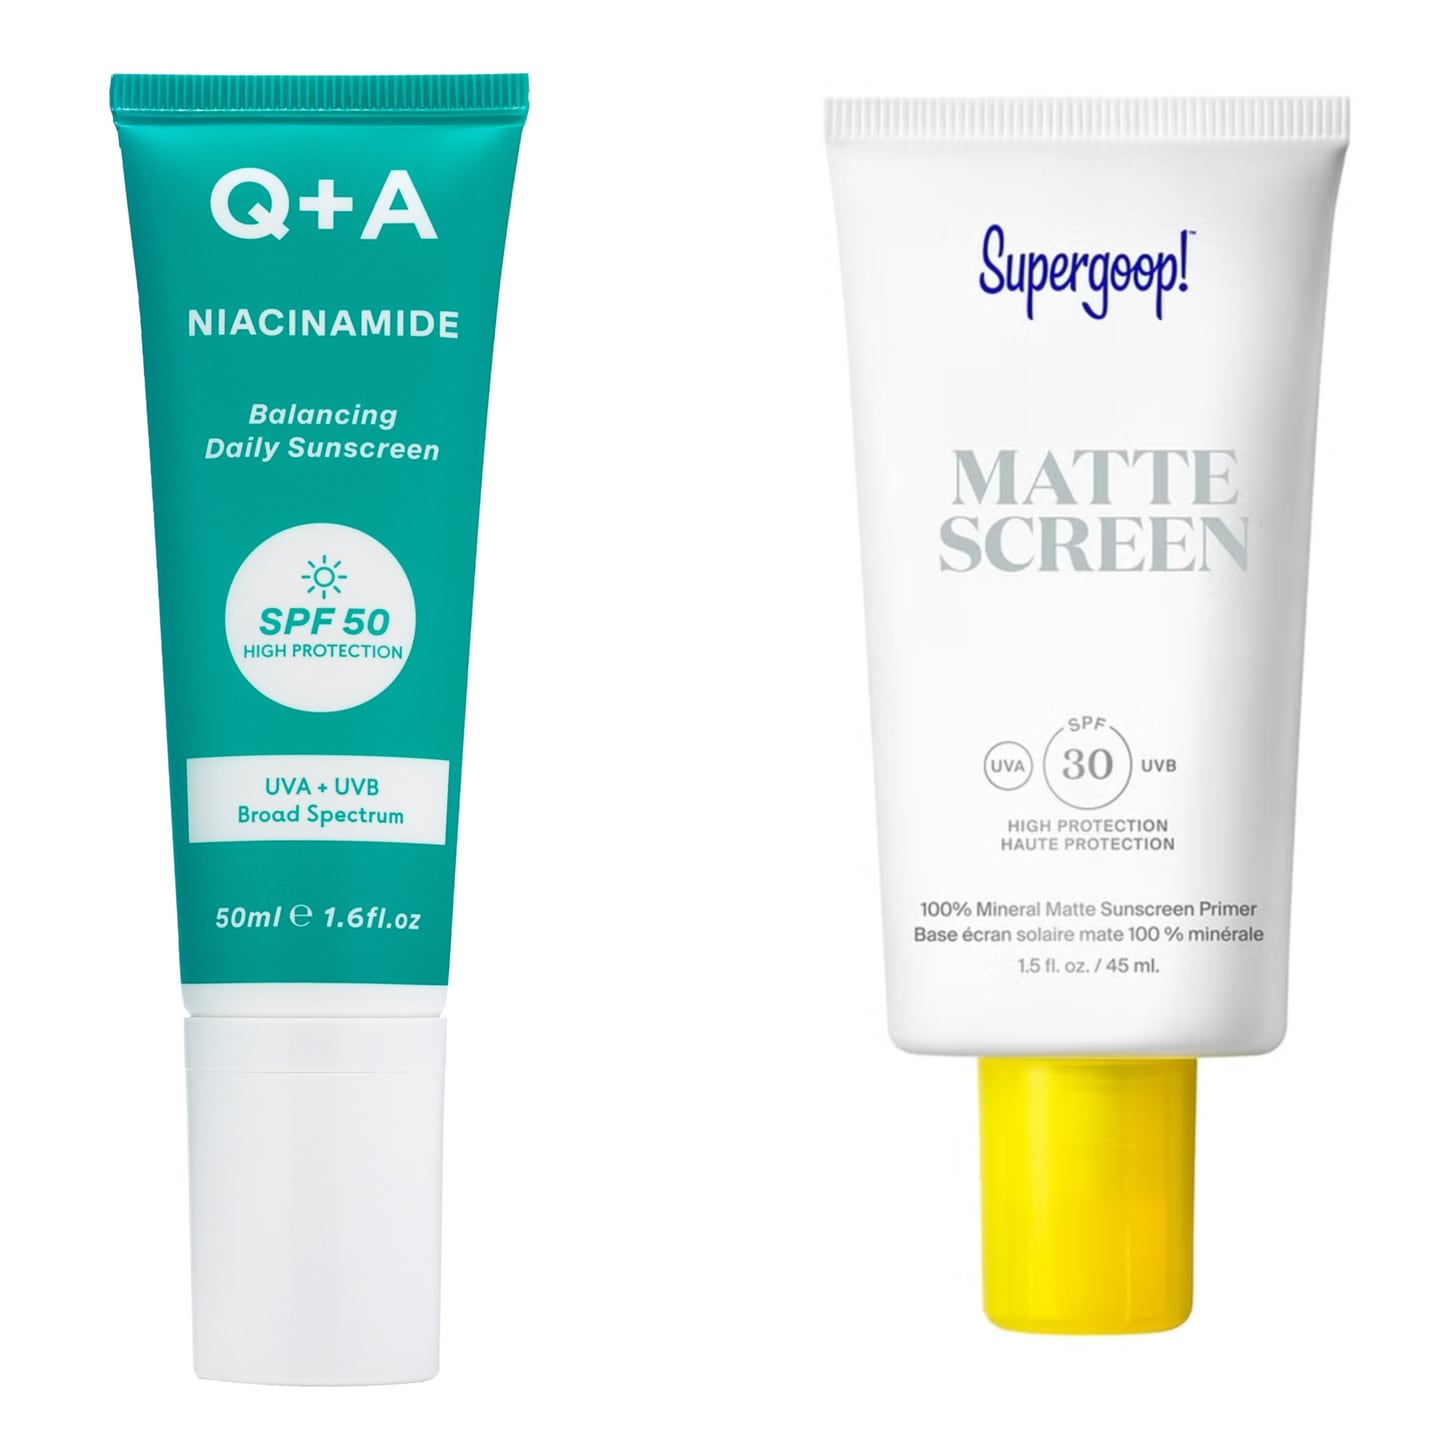 Q&A Niacinamide SPF50 Balancing Daily Sunscreen (€18 from Chemist Warehouse) and Supergoop! Mineral Mattescreen SPF30 (€39 from cultbeauty.com)